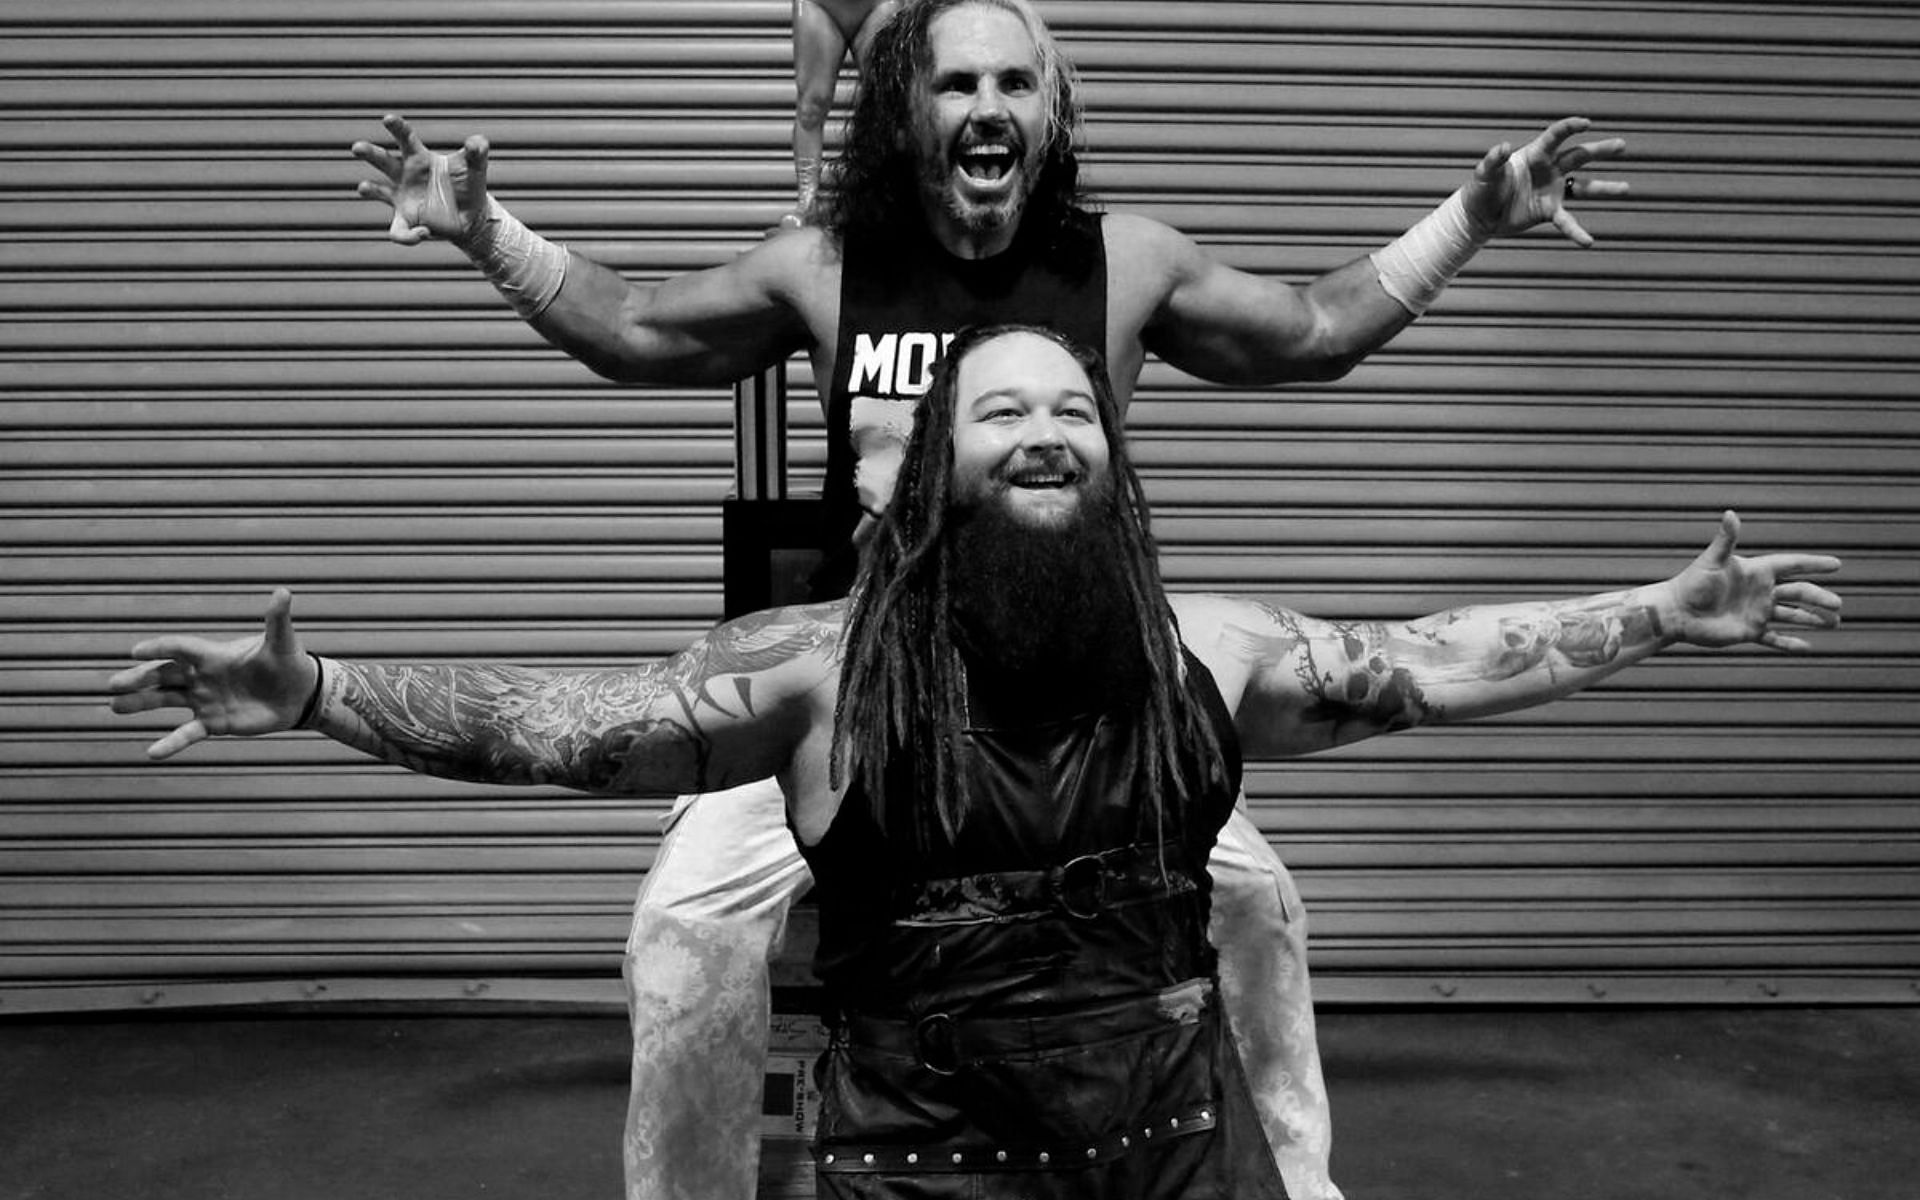 Matt Hardy and Bray Wyatt formed The Deleter of Worlds at WrestleMania 34 [Image Source: WWE.com]